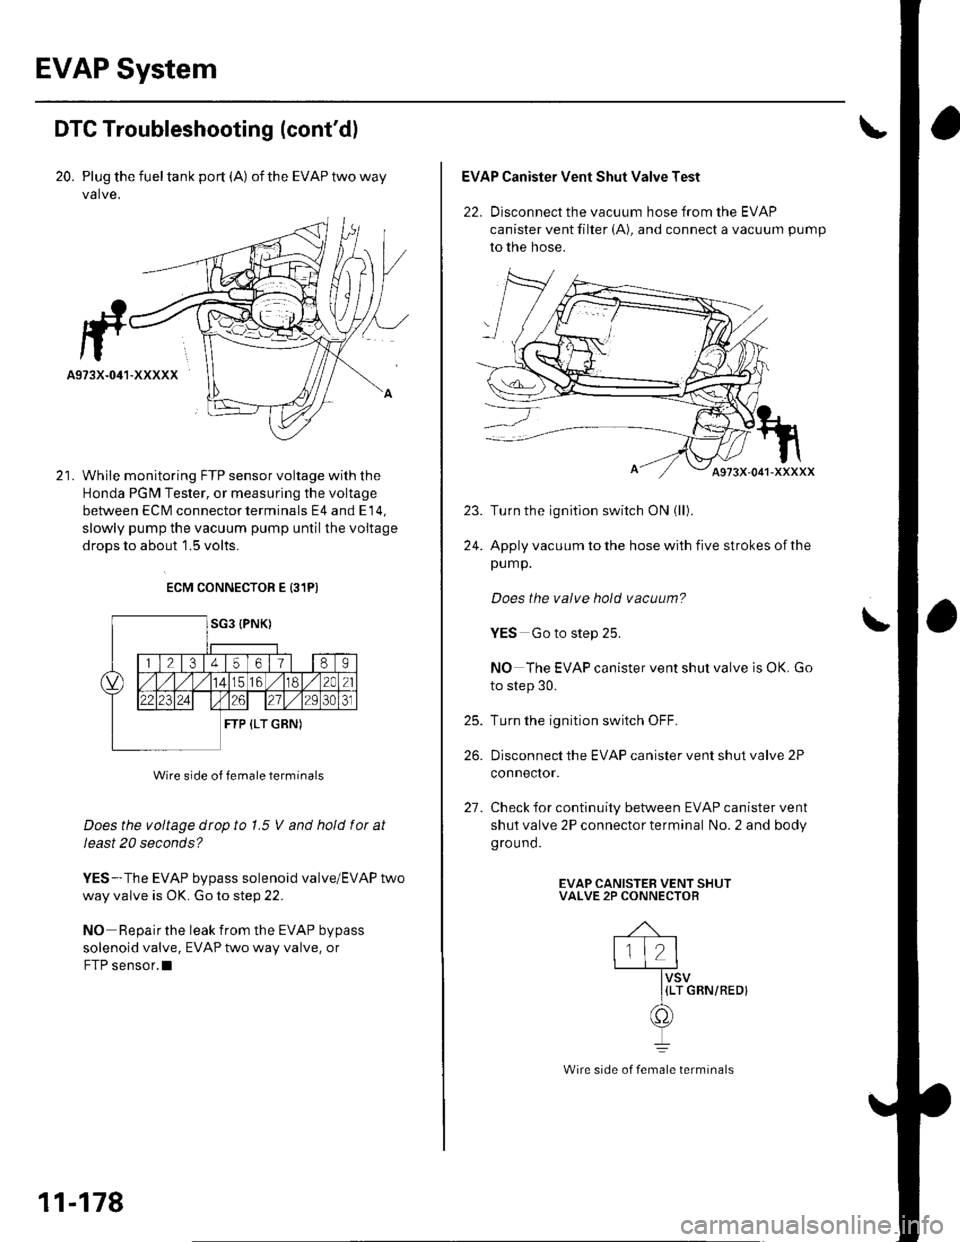 HONDA CIVIC 2003 7.G Workshop Manual EVAP System
DTC Troubleshooting (contdl
20. Plug the fueltank port (A) oftheEVAPtwoway
valve,
While monitoring FTP sensor voltage with the
Honda PGM Tester, or measuring the voltage
between ECM conne